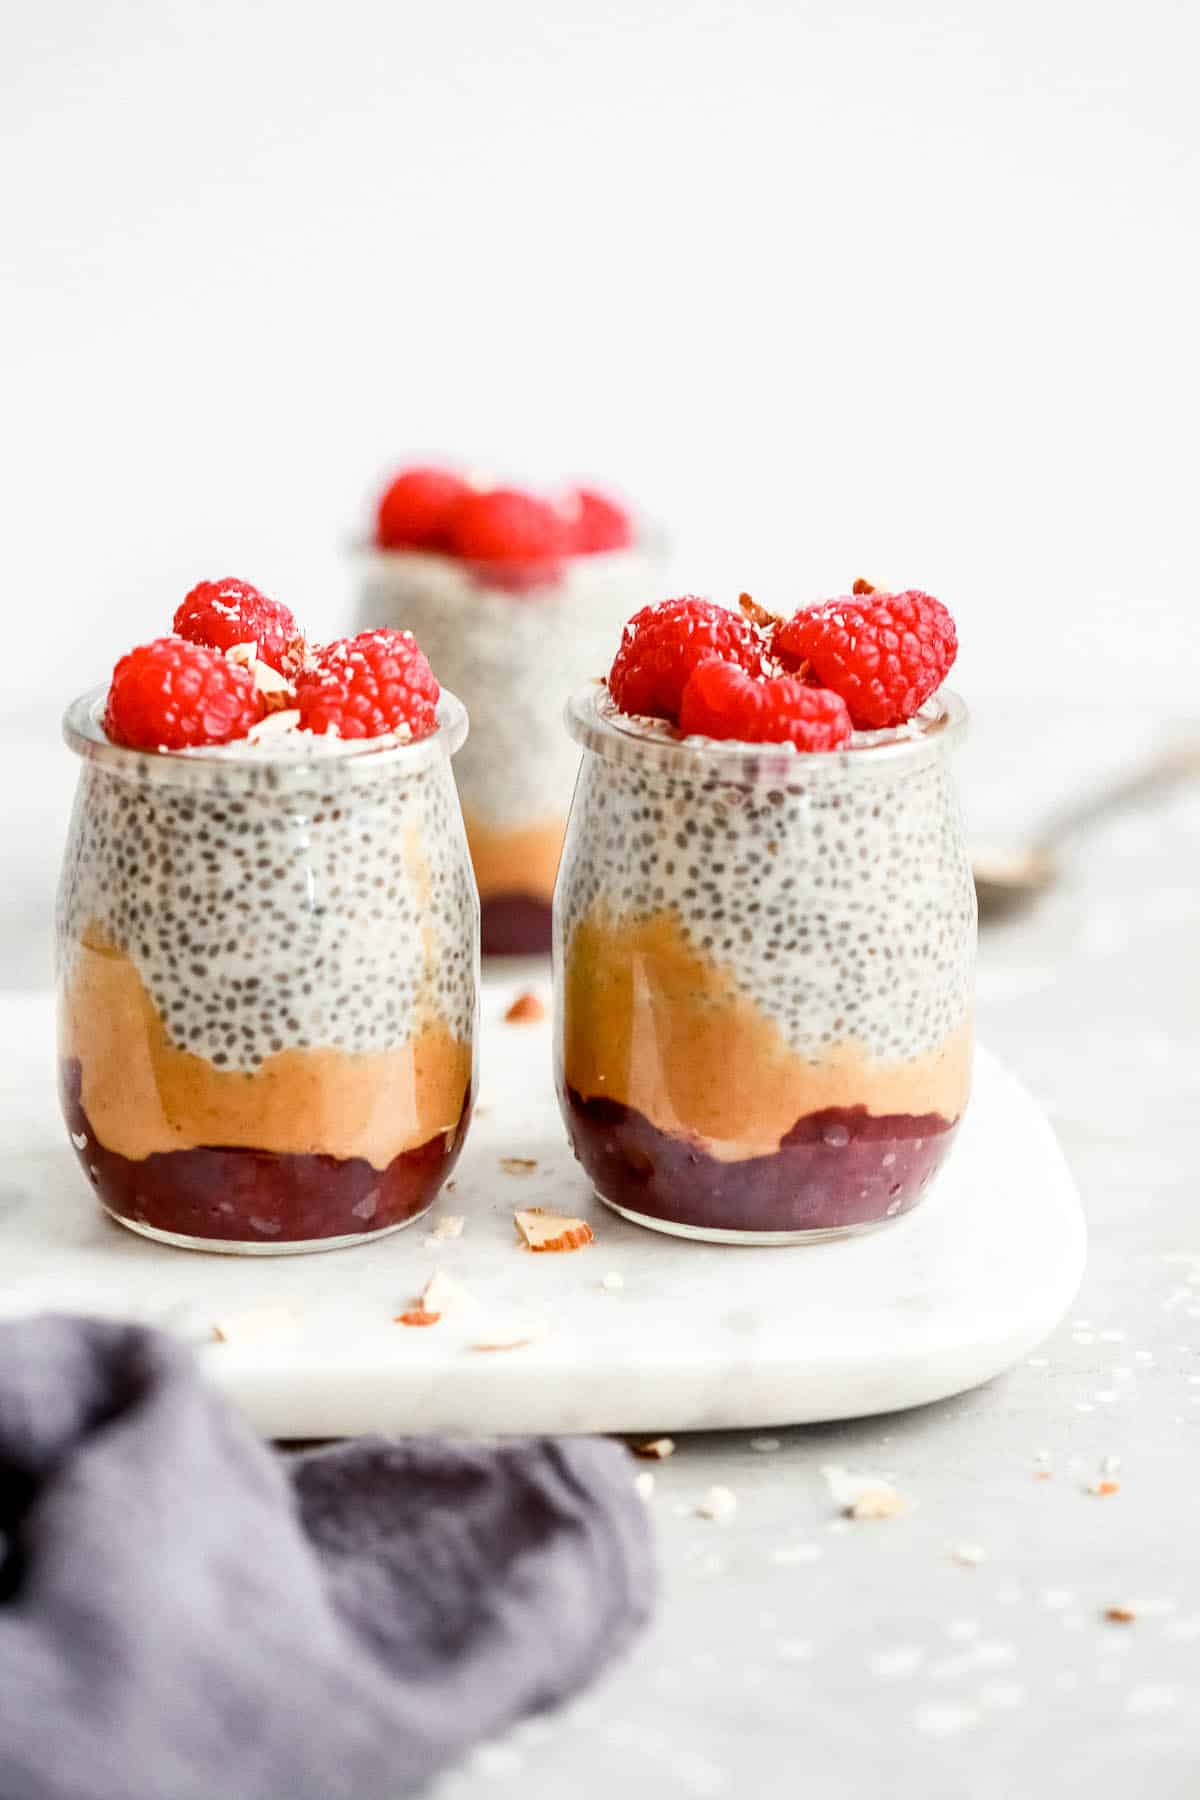 quick paleo friendly pudding topped with berries